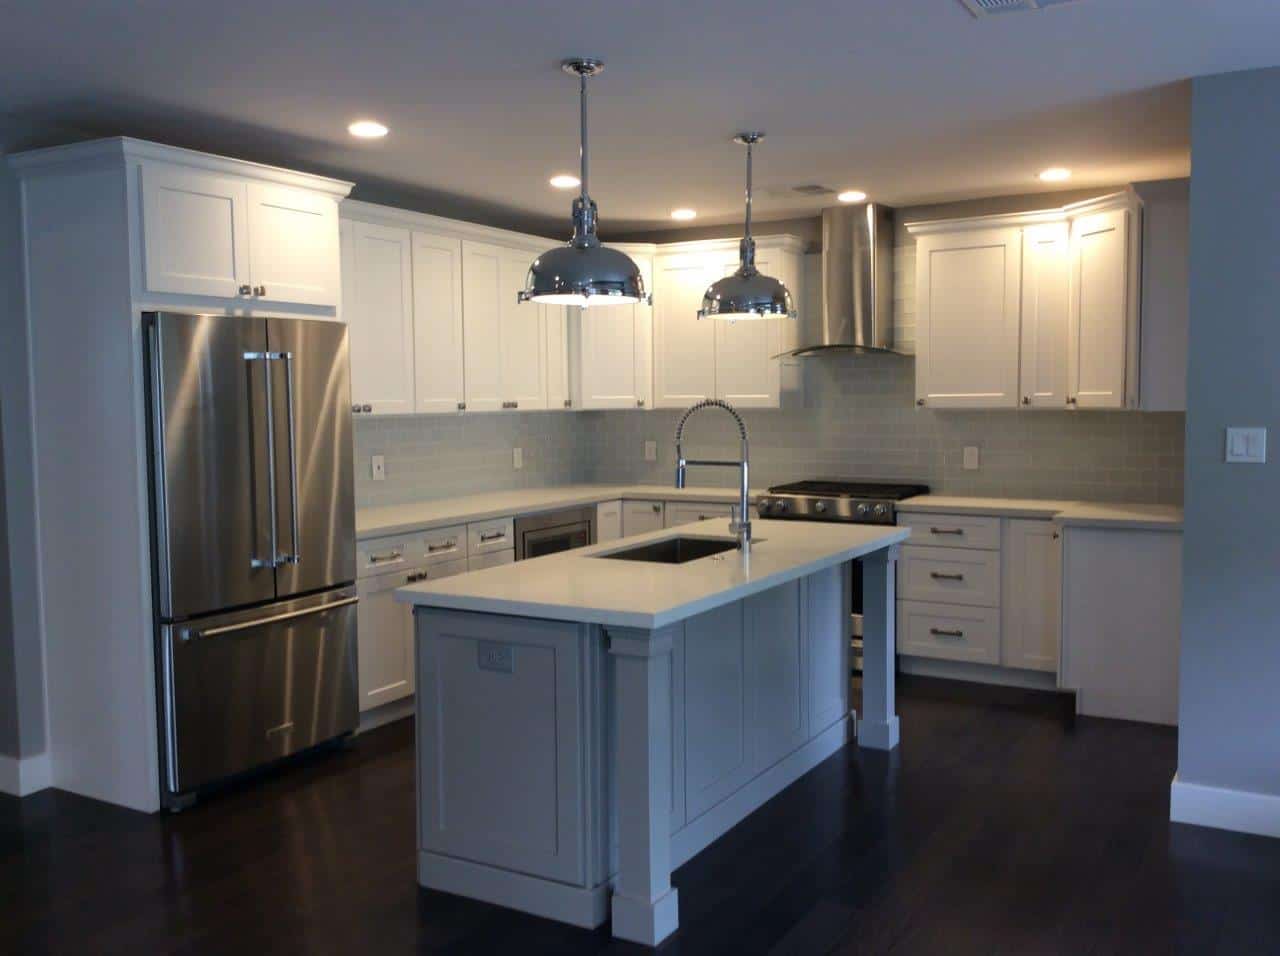 Newly painted kitchen with silver appliances